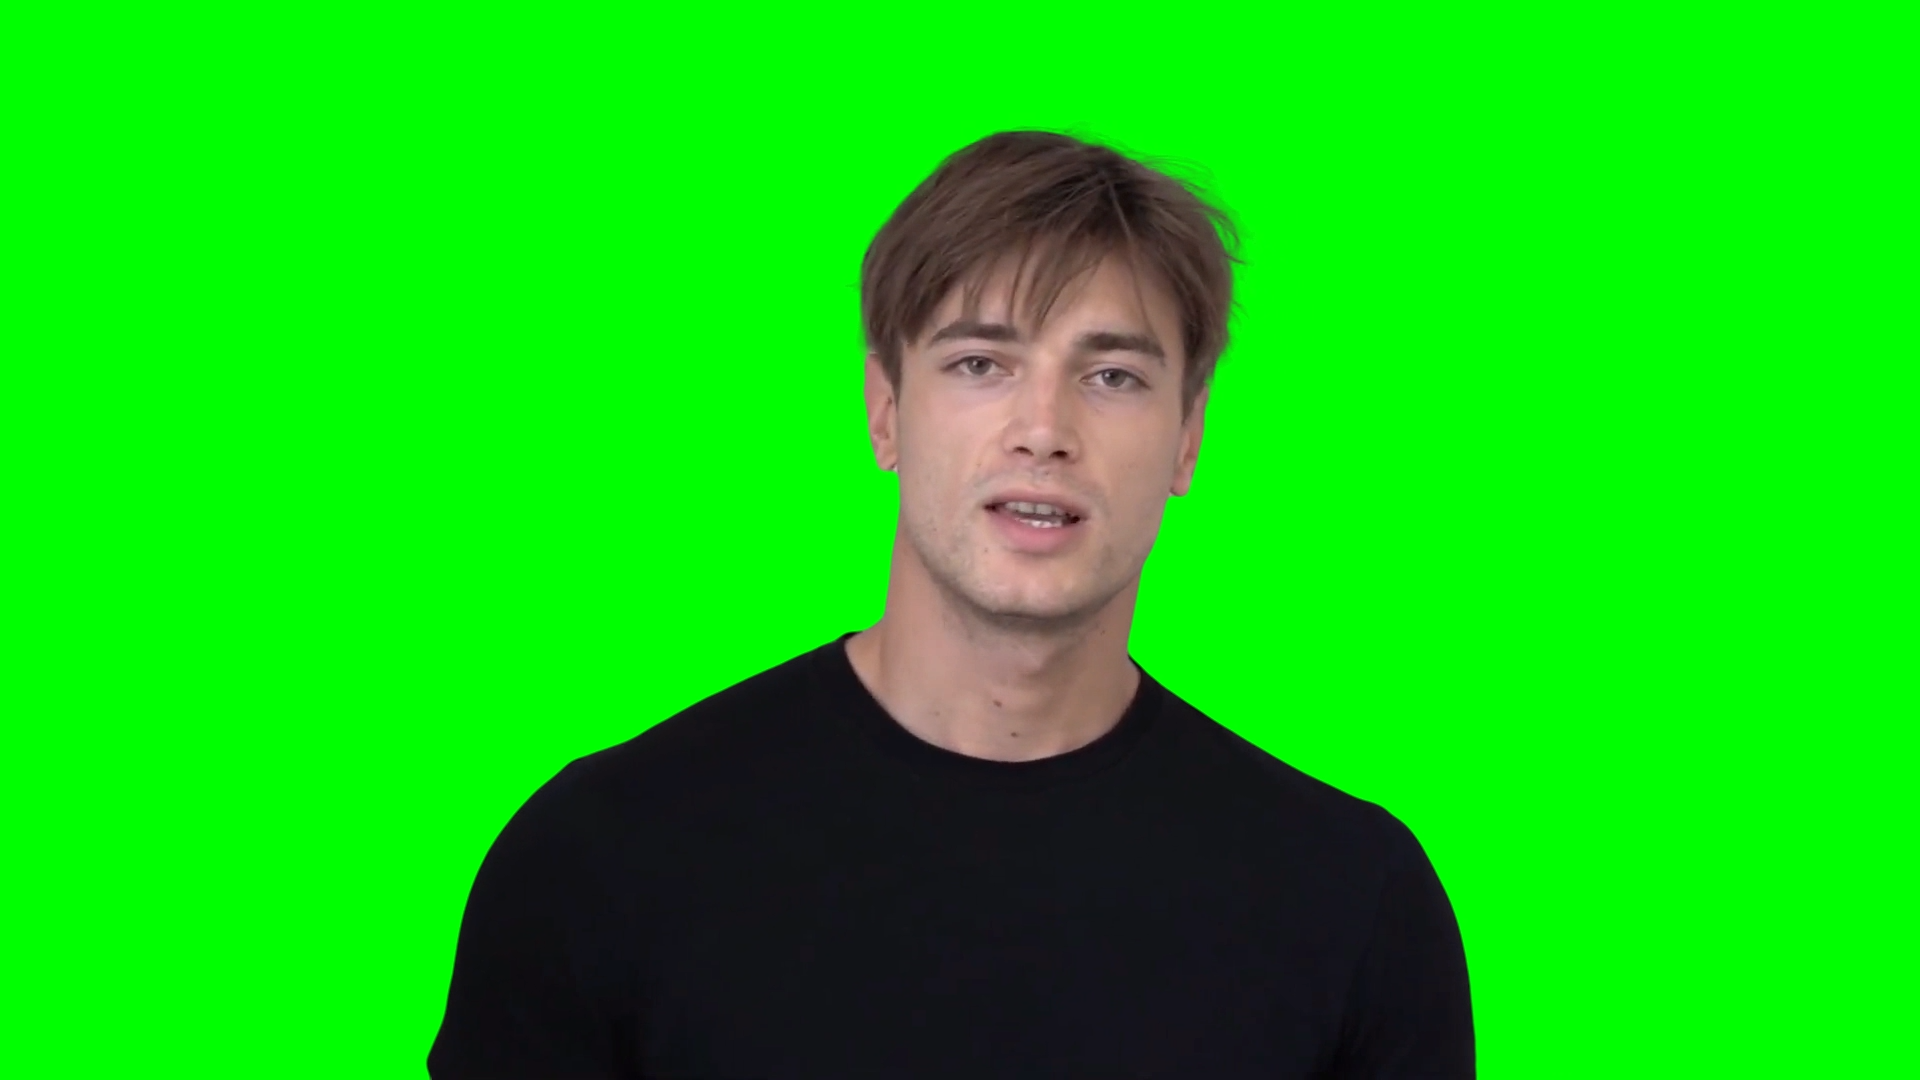 Hello my name is Eduard I'm from Romania and I'm your daughter in Japan (Green Screen)